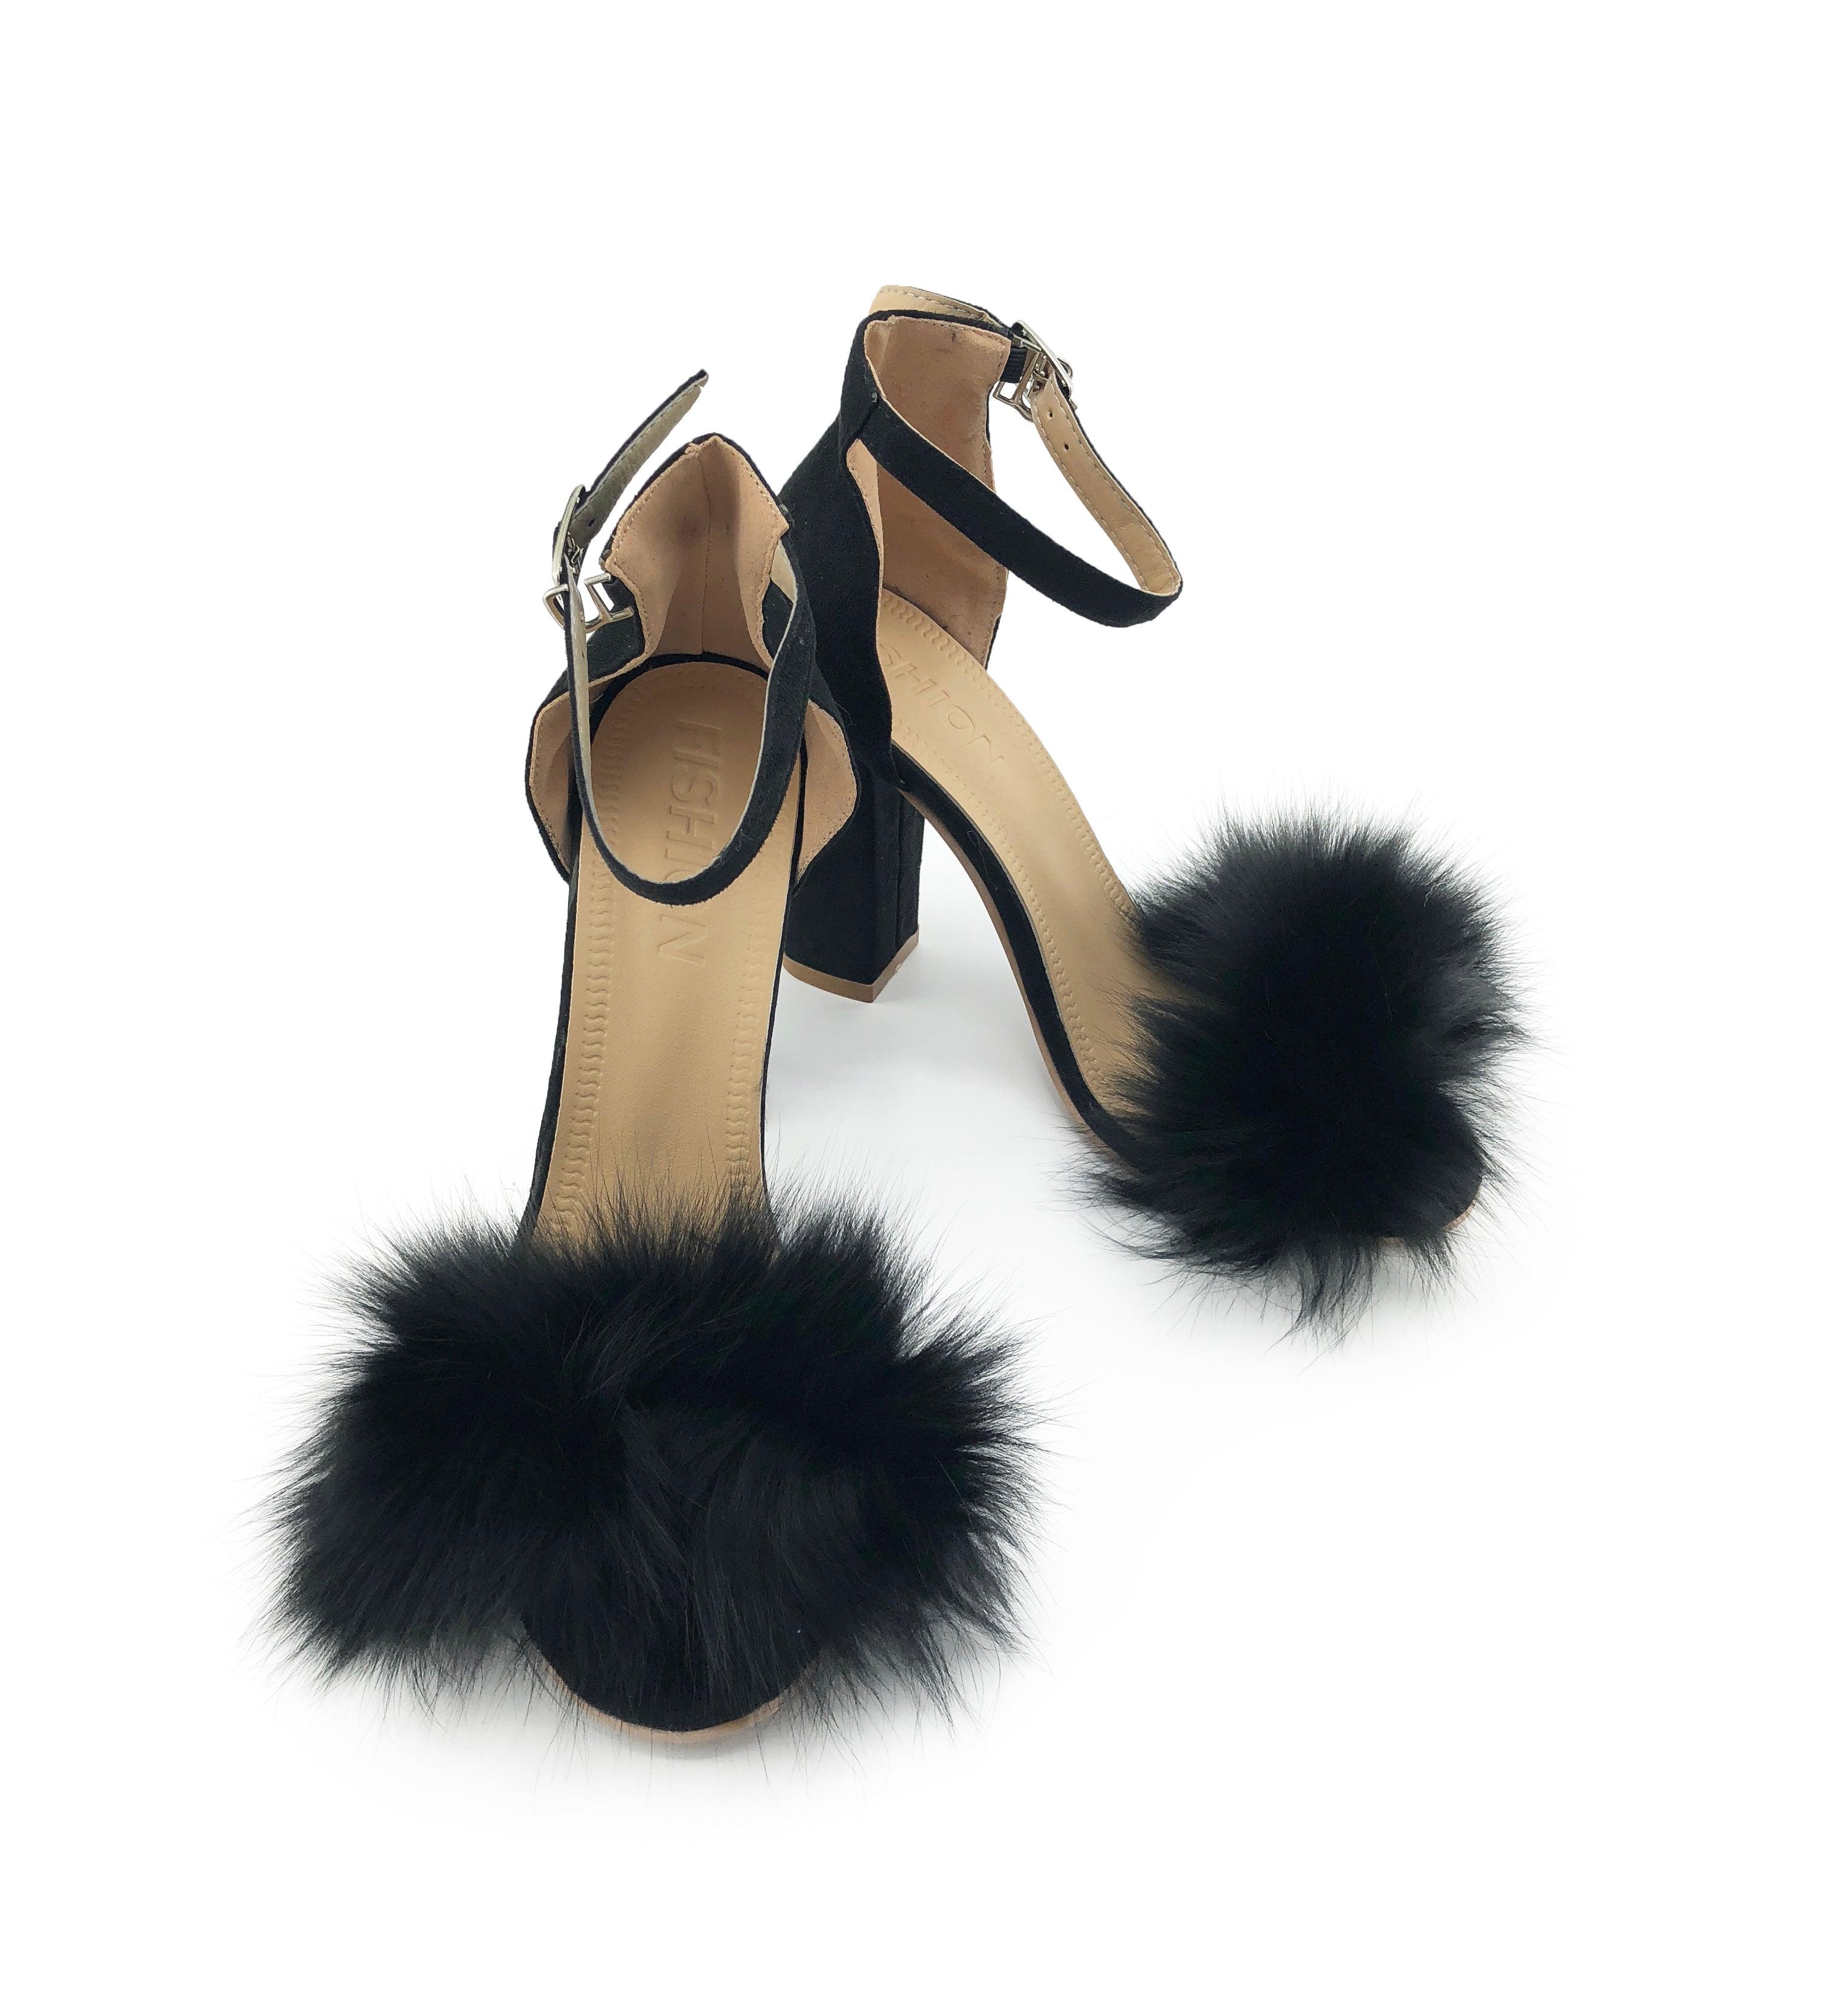 Shoppers say these £130 furry TK Maxx heels look like something